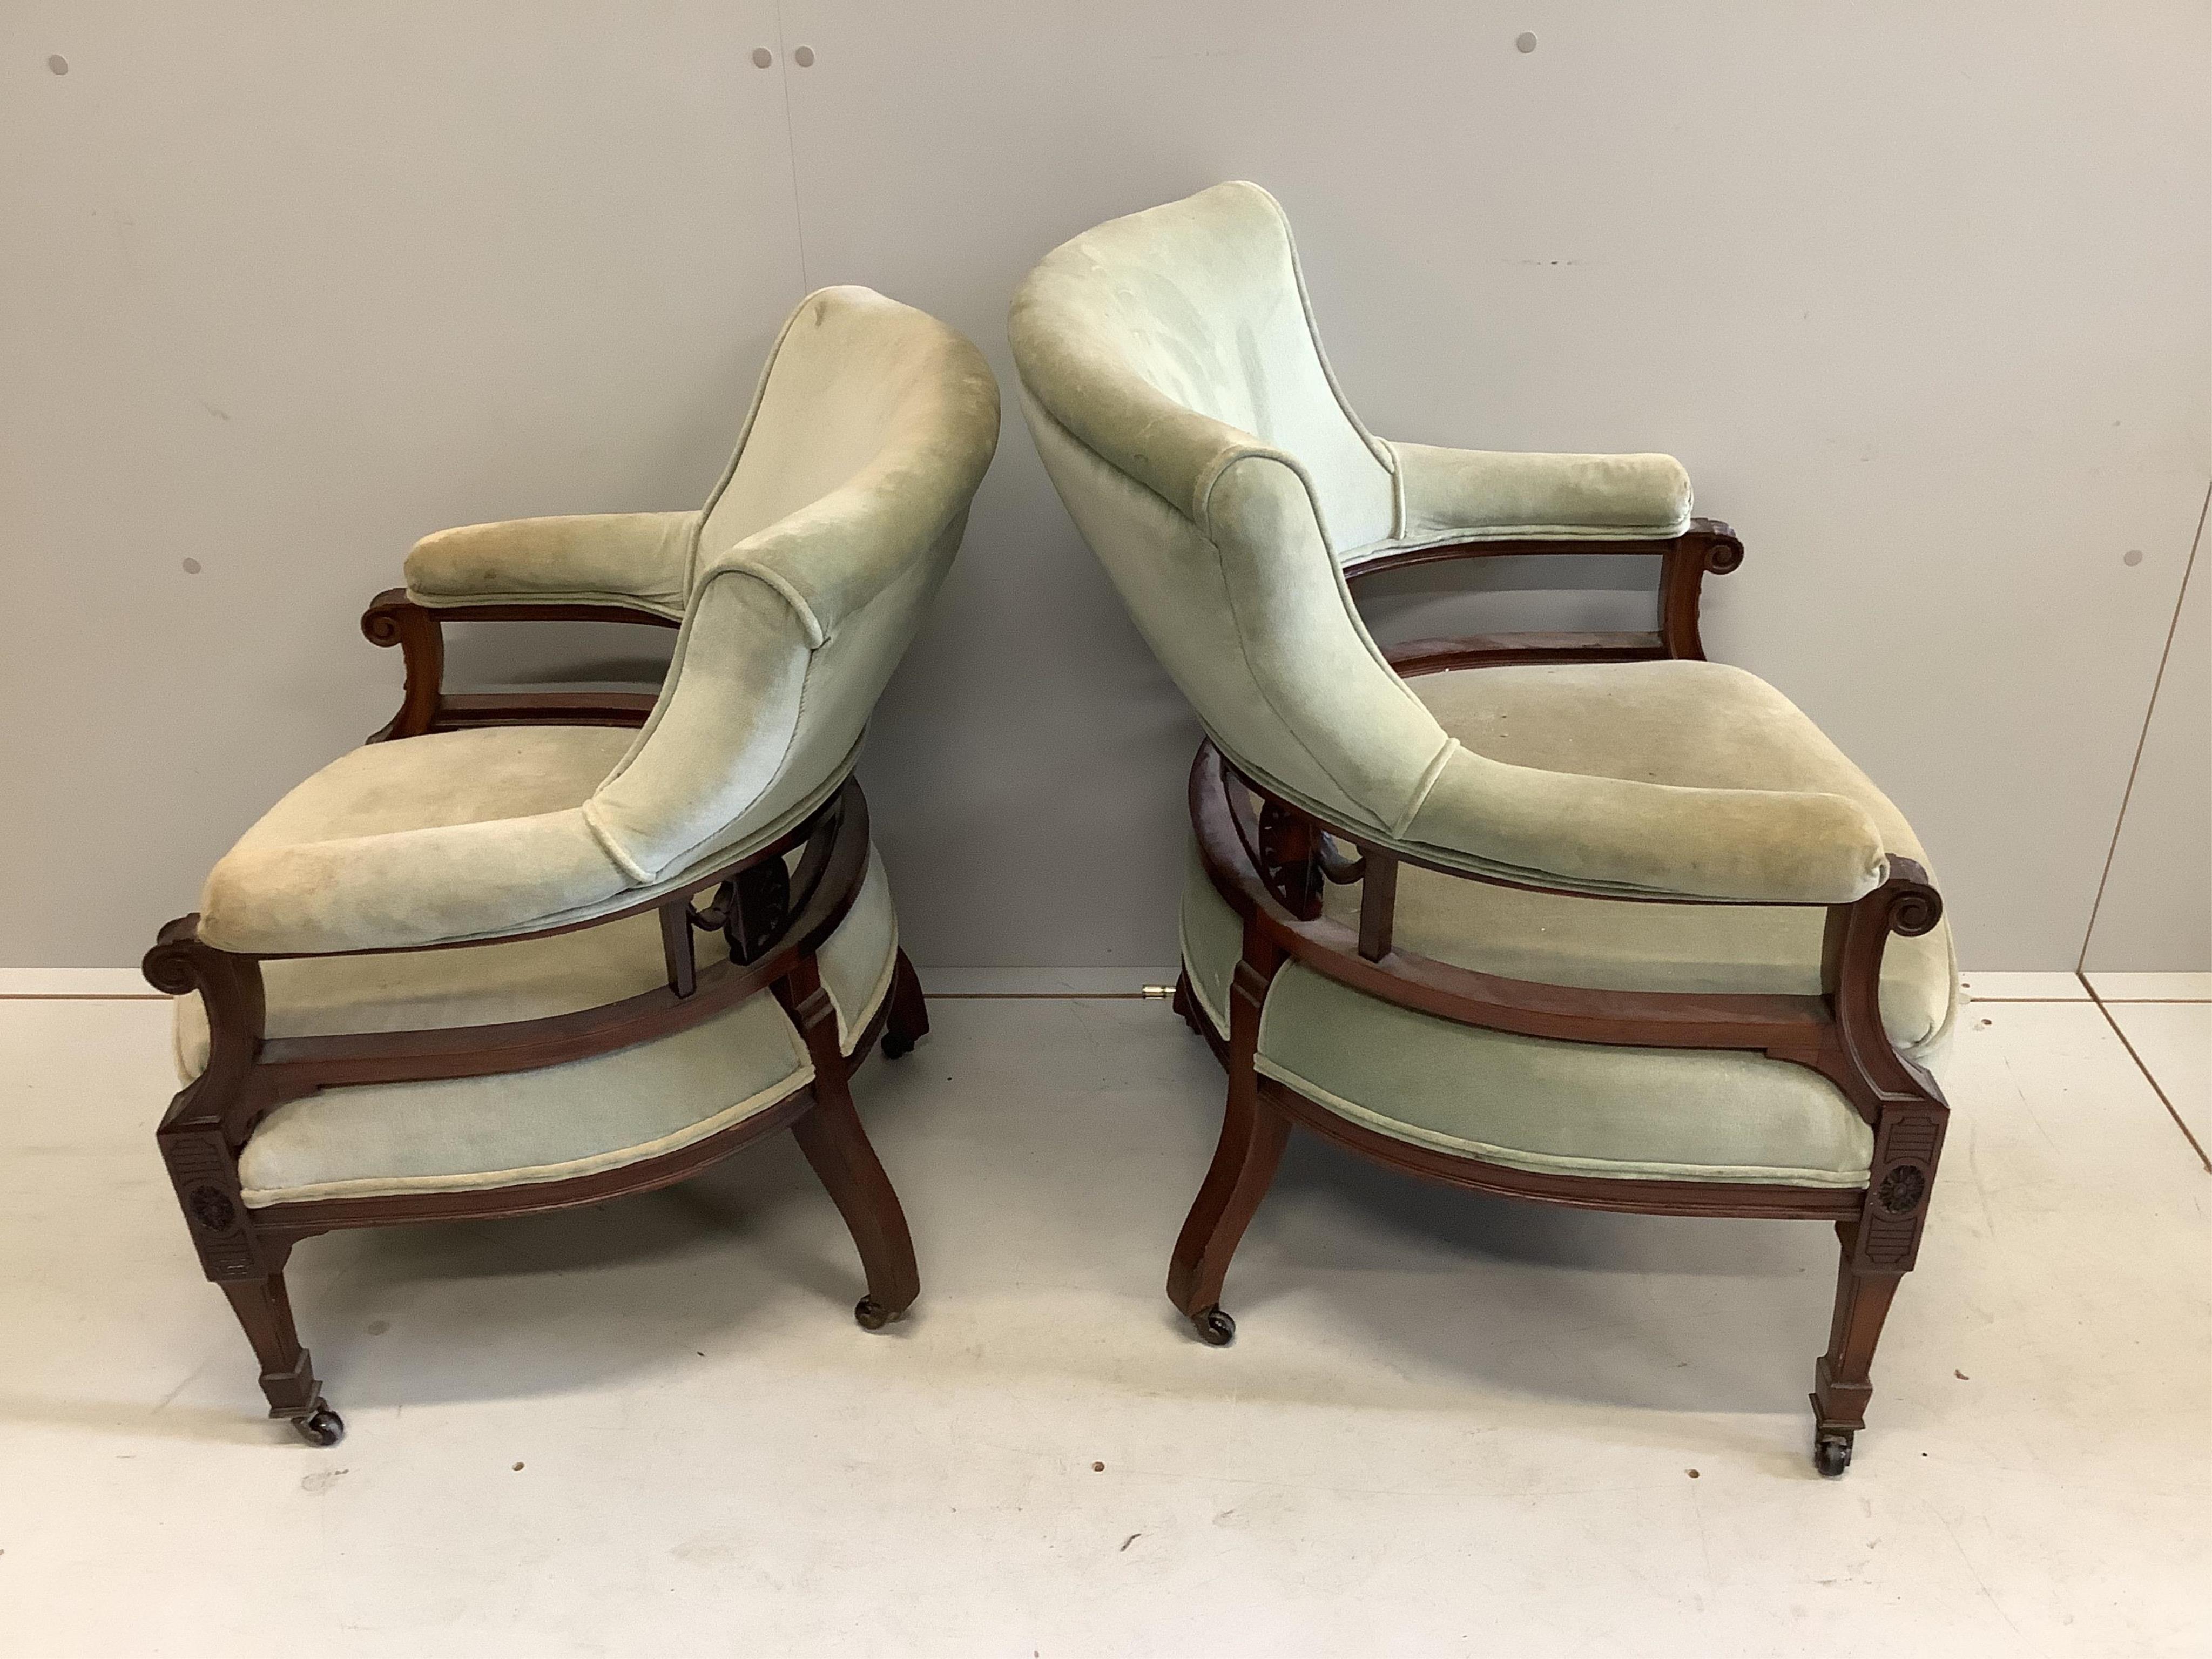 Two Victorian upholstered mahogany tub armchairs, larger width 65cm, depth 56cm, height 80cm. Condition - fair